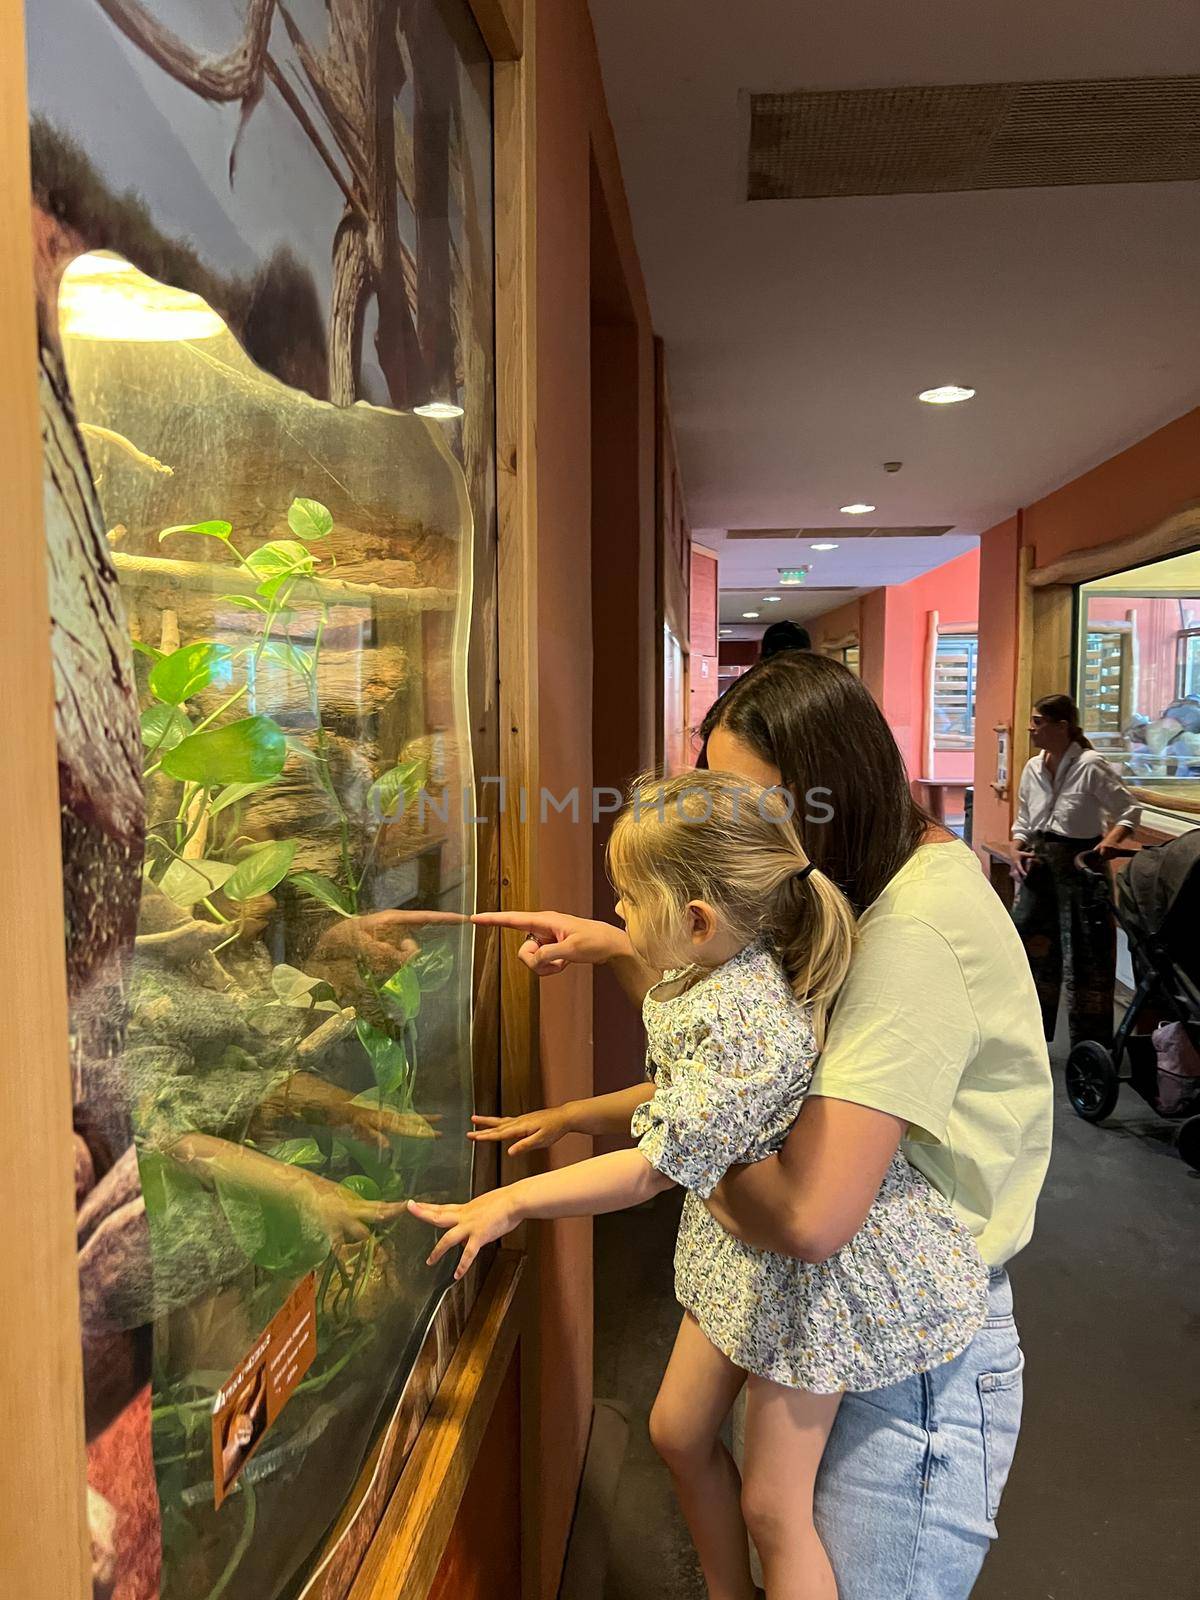 Mom shows the little girl a terrarium behind glass by Nadtochiy